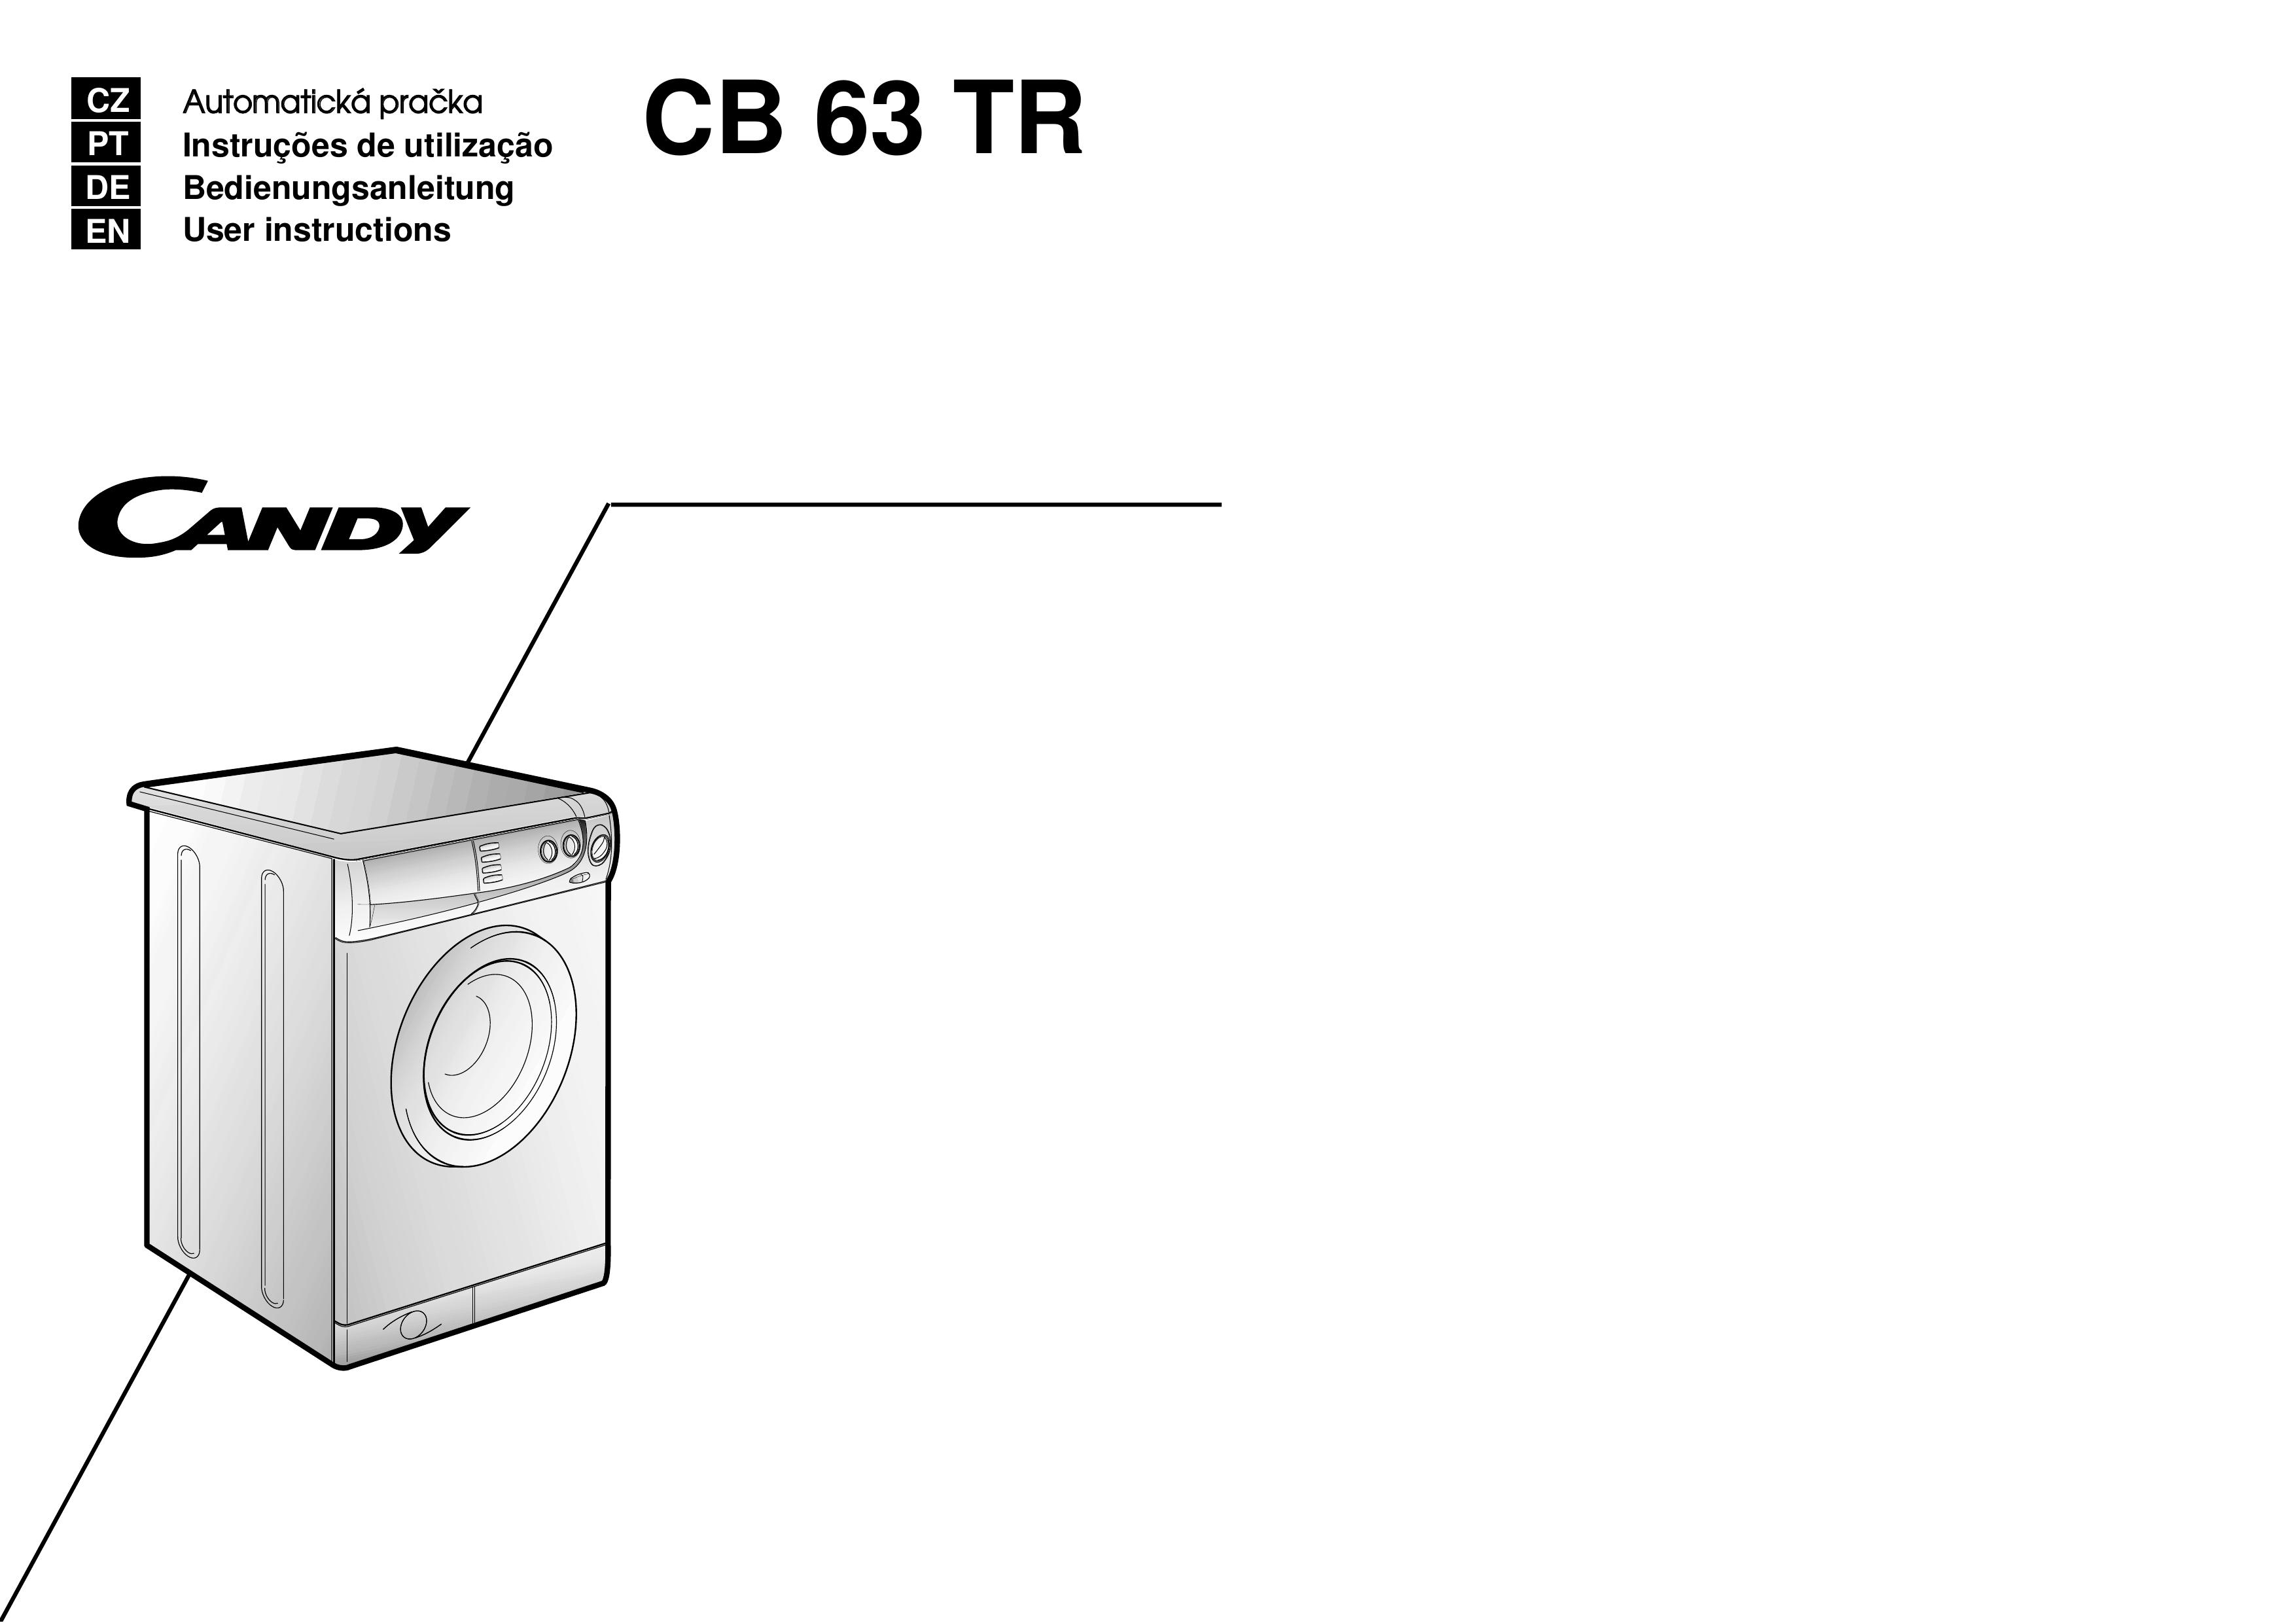 Candy CB 63 TR Washer User Manual